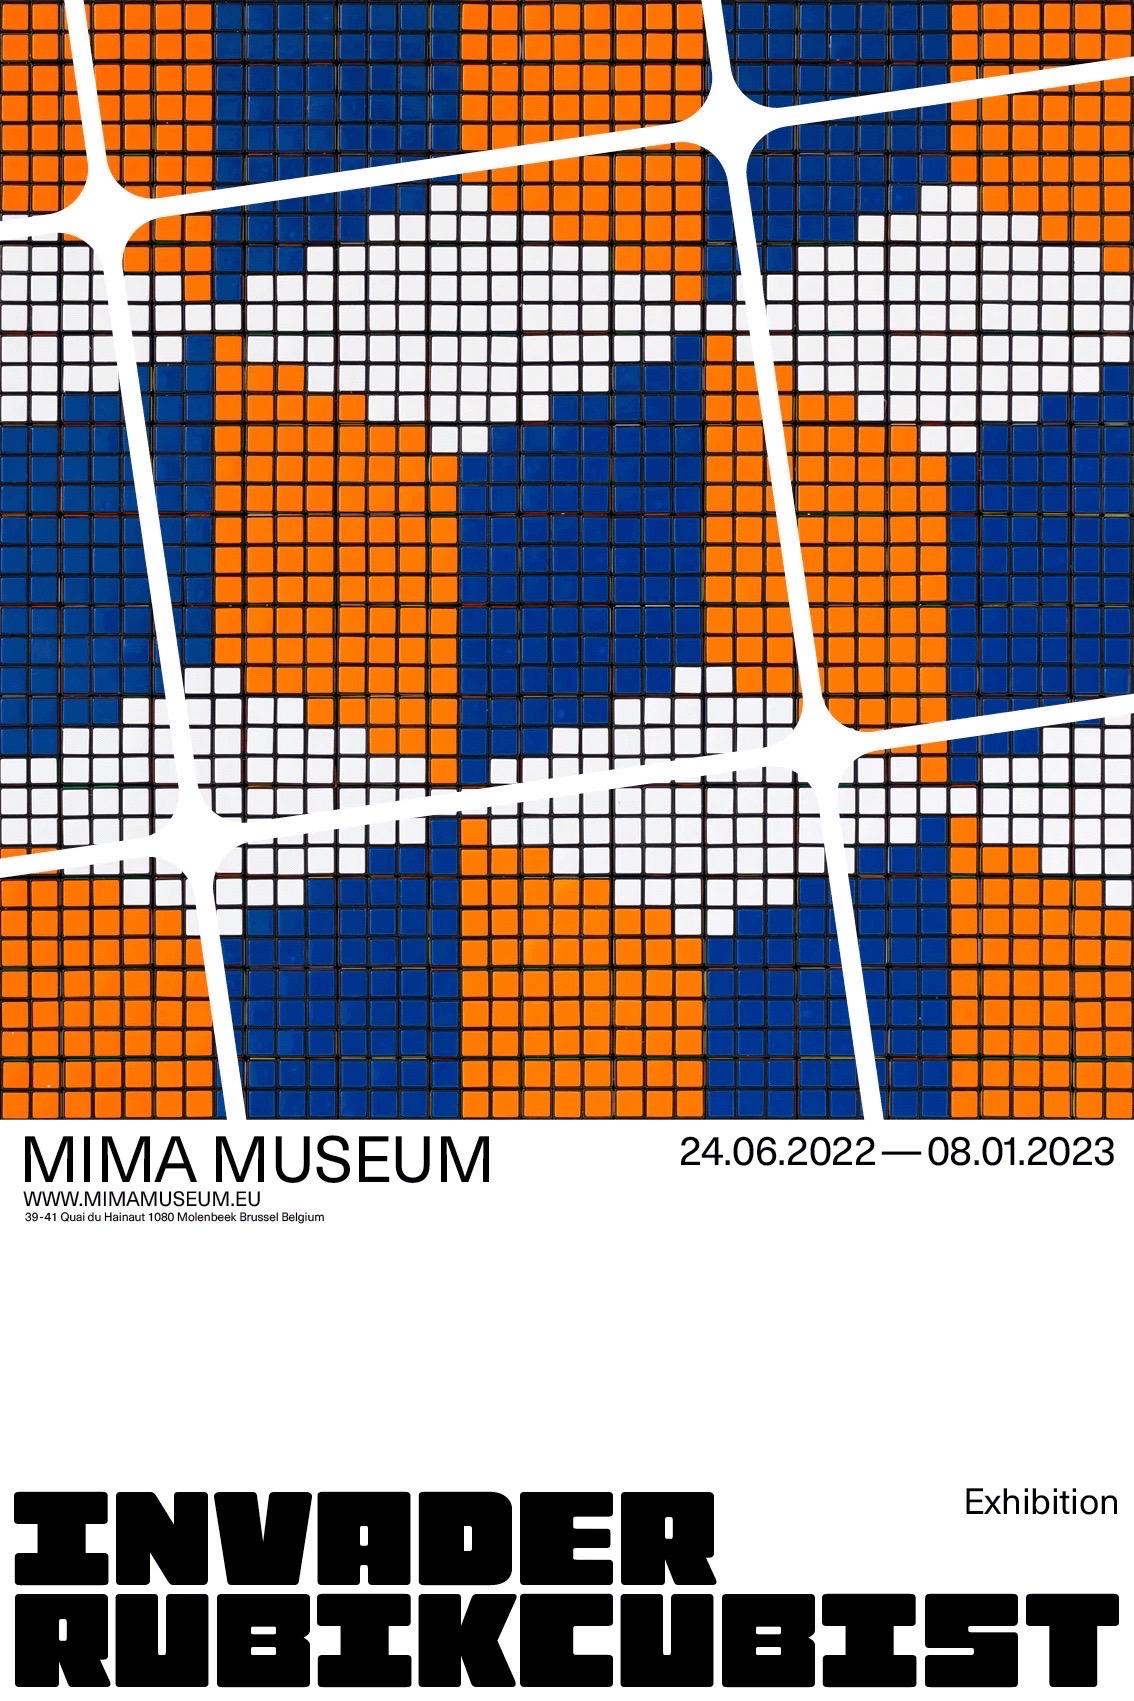 Invader, Rubikcubist MIMA Poster, 2022

﻿Offset lithograph in colour on 130gsm Arctic Volume Silk poster paper from Invader's MIMA gallery show in Brussels 

40 x 60 cm (15.7 x 23.6 in)

Open Edition